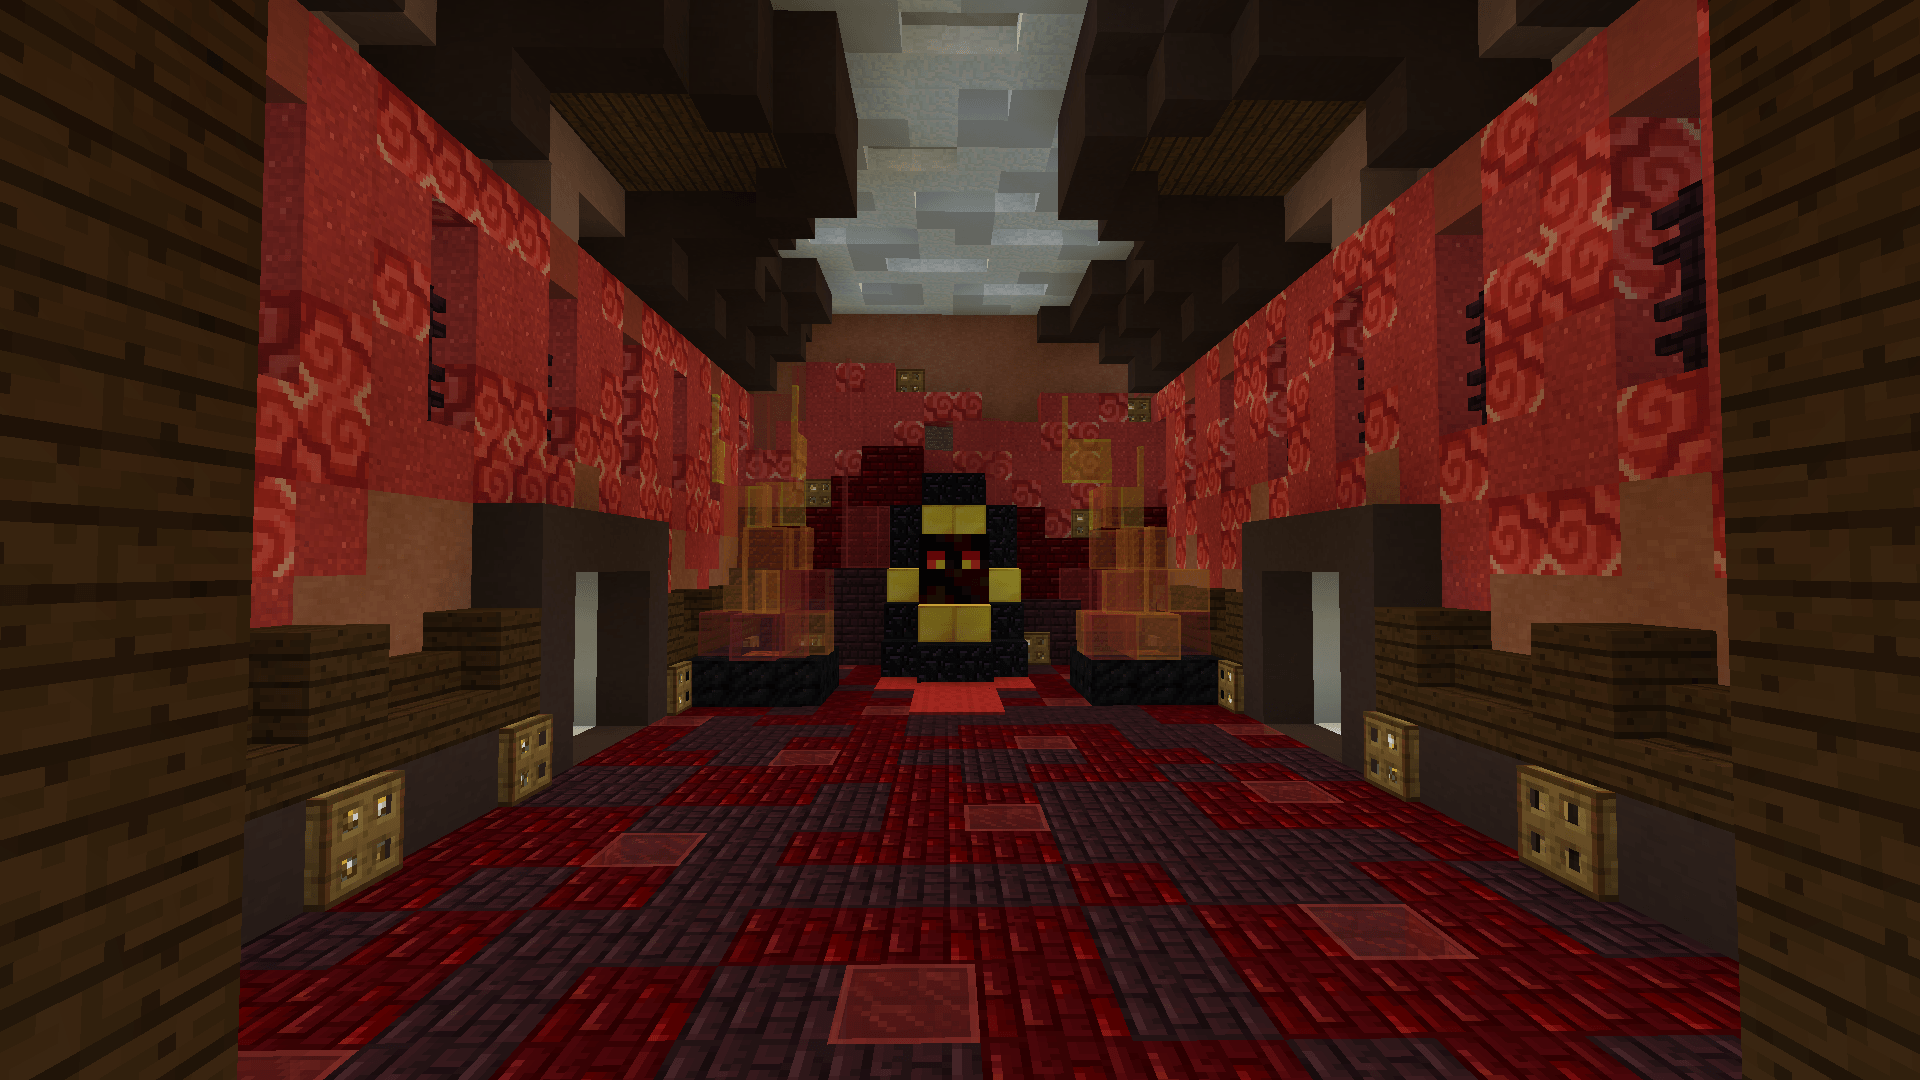 I built an underground throne room for Cuby the Magma Cube